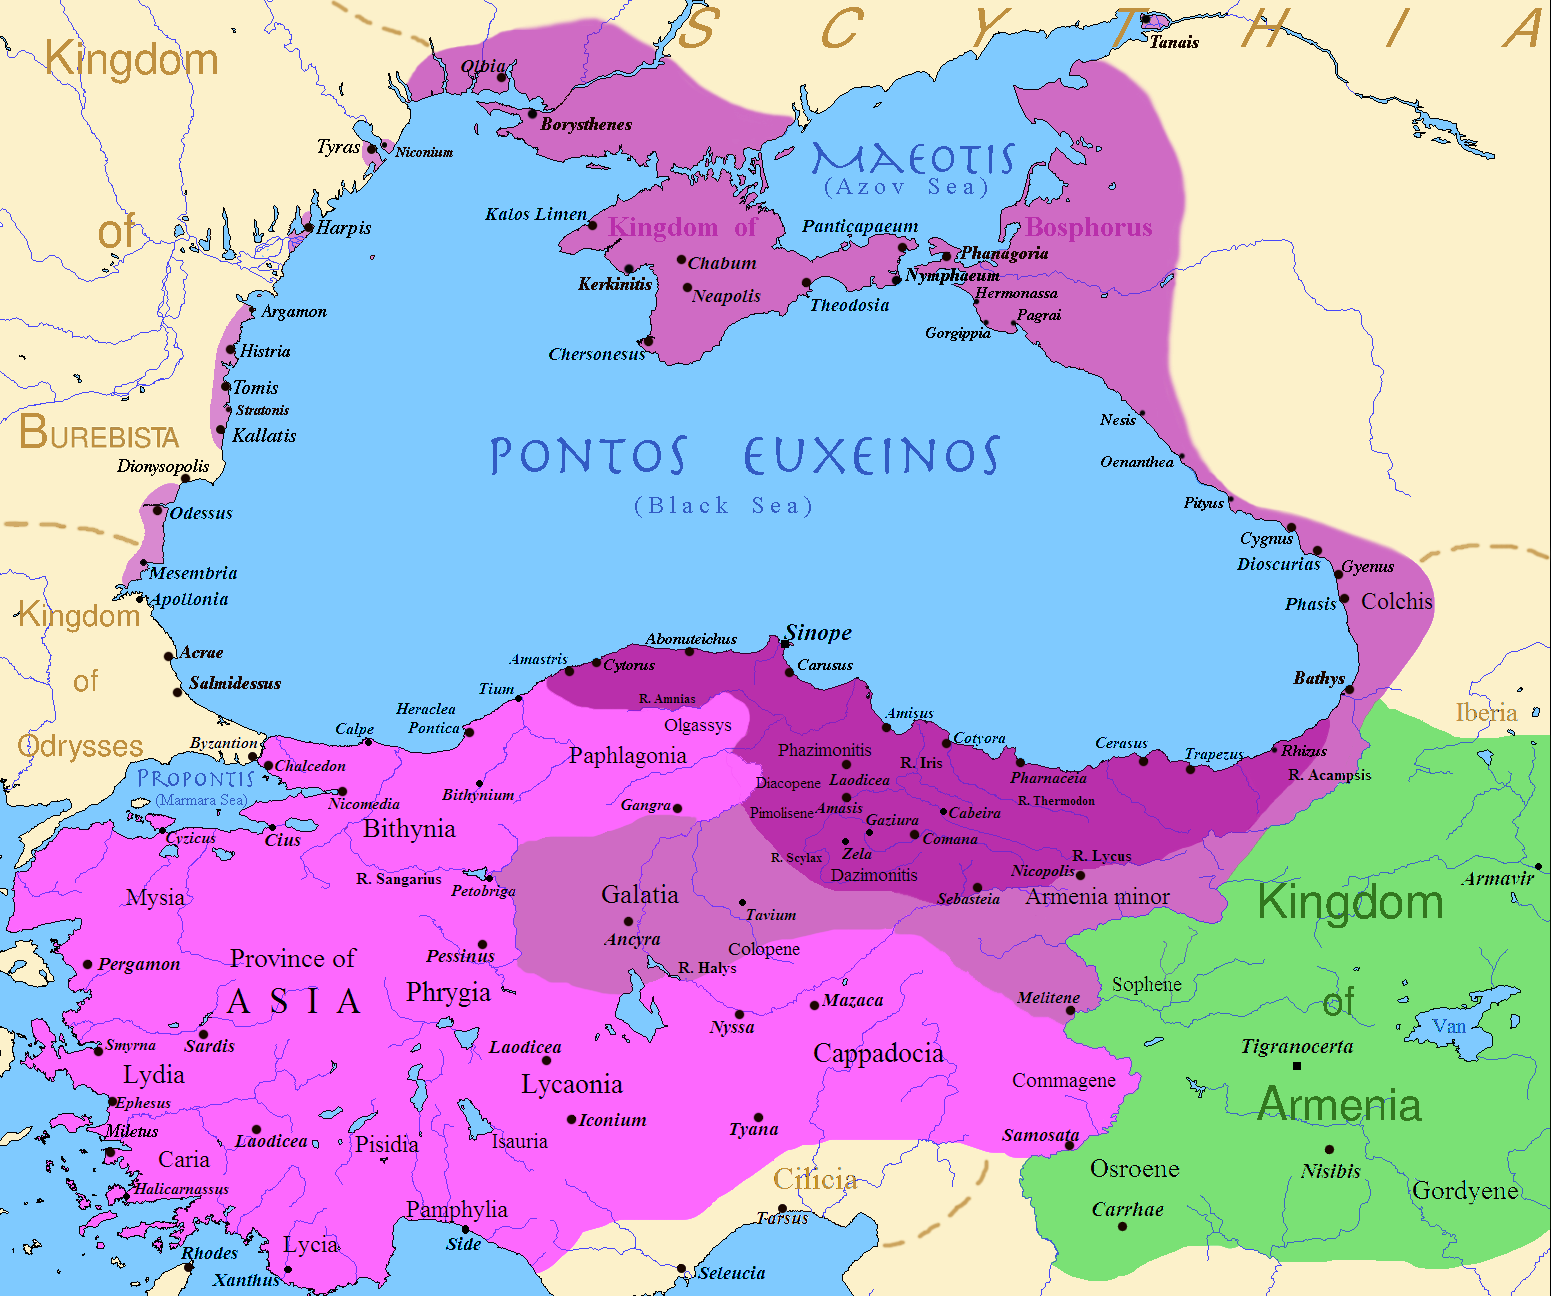 This image depicts a color-coded map of the ancient Kingdom of Pontus. It illustrates three distinct phases: the darkest purple areas represent the kingdom before Mithridates VI's reign, the purple areas show the extent of the kingdom after his conquests, and the pink areas indicate the territories acquired during the First Mithridatic War. The Black Sea, labeled as "PONTOS EUXINOS," is centrally located, with surrounding regions and cities marked, showcasing the historical expansion of Pontus.